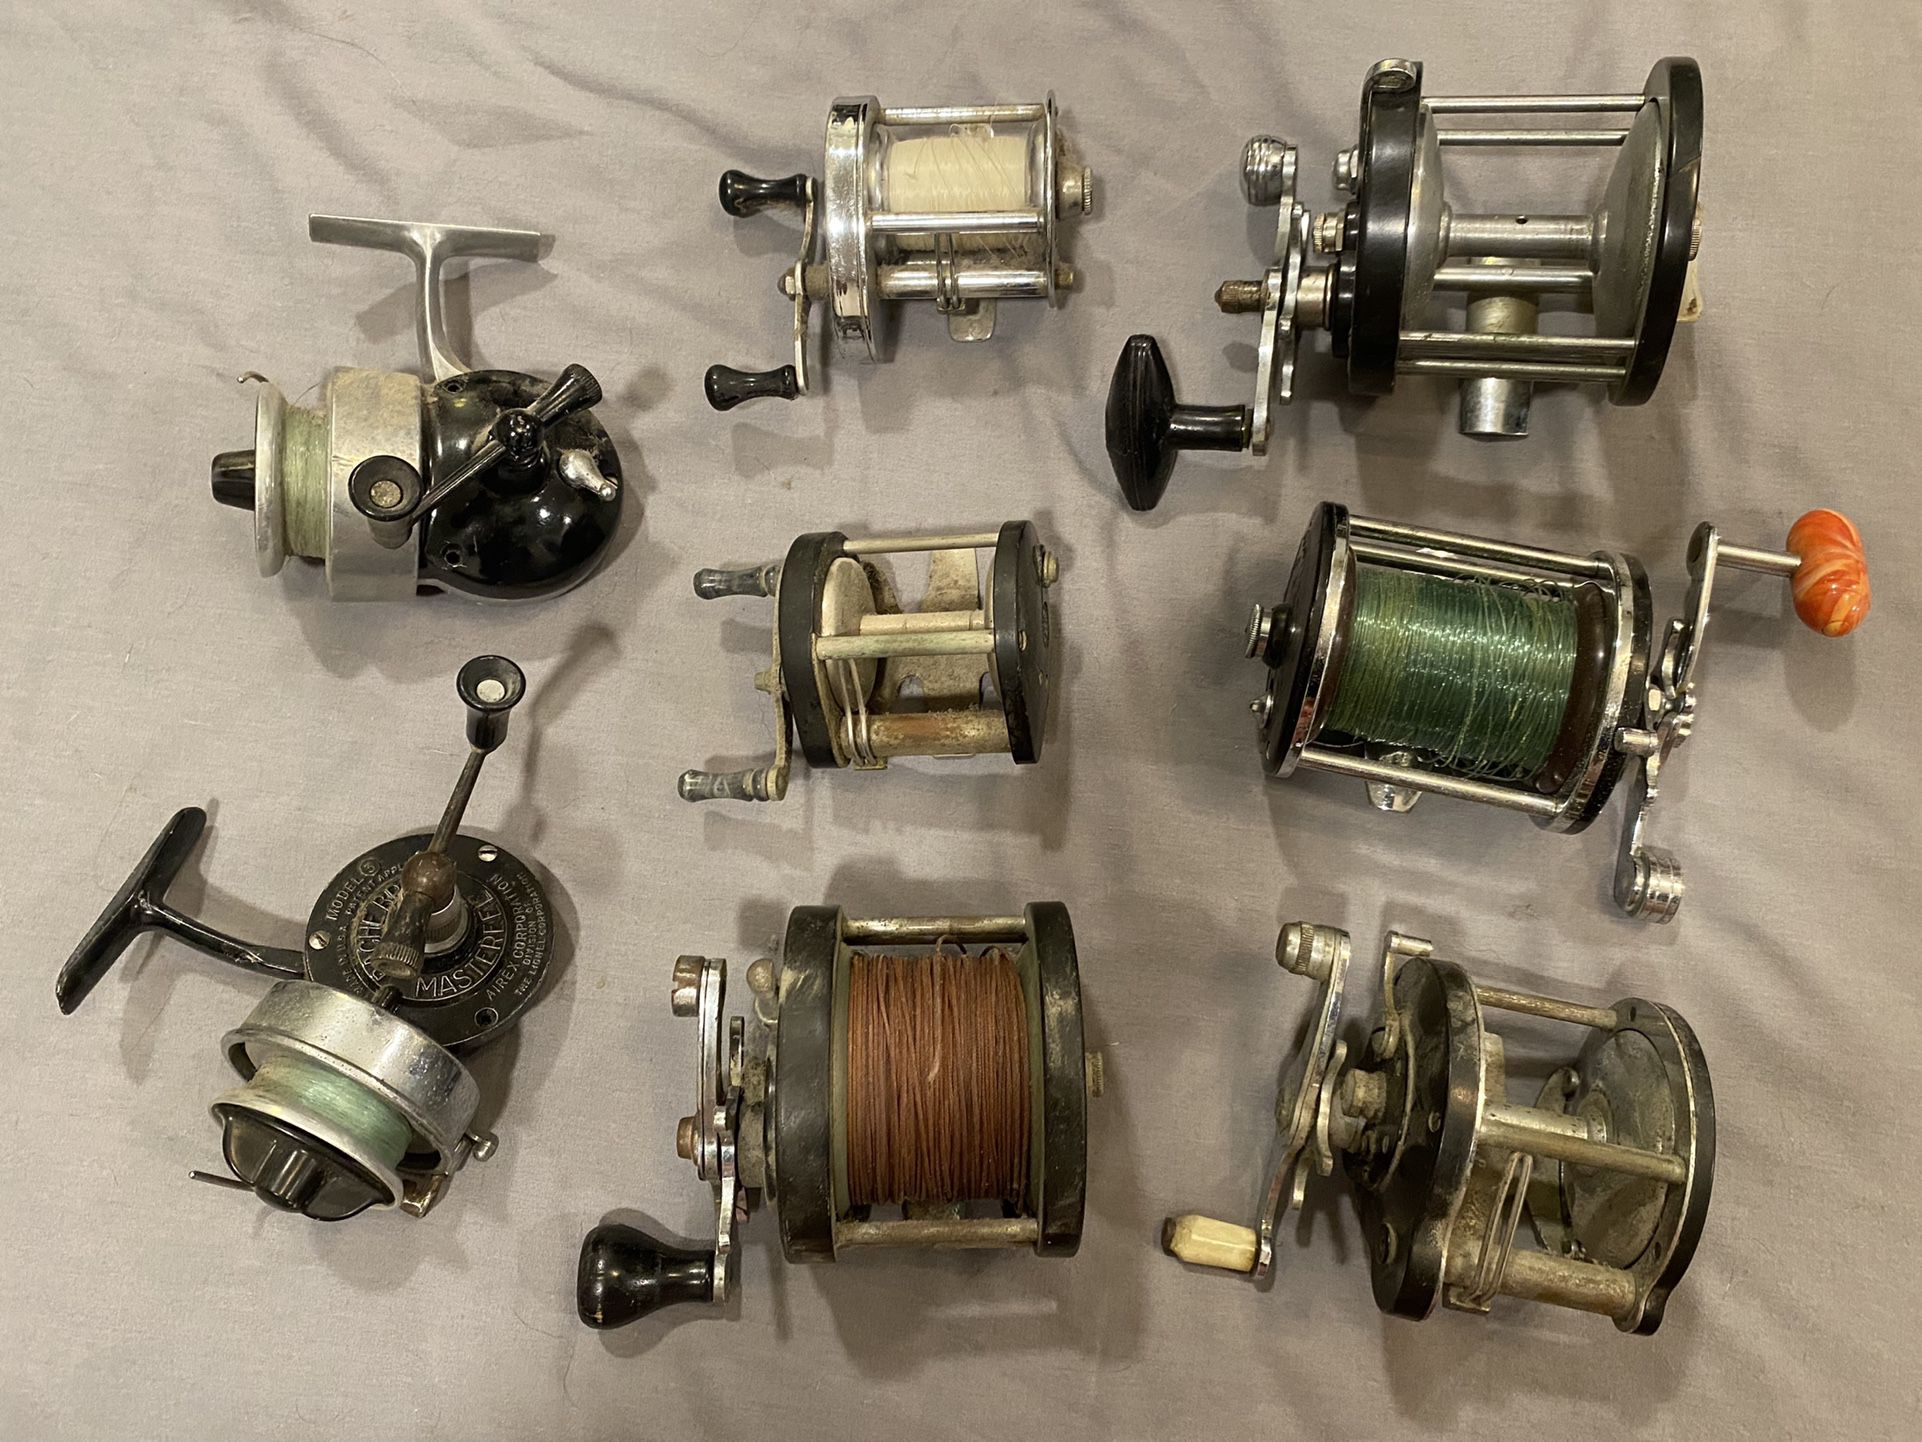 Antique Fishing Reels - Set Of 8 for Sale in Chino, CA - OfferUp